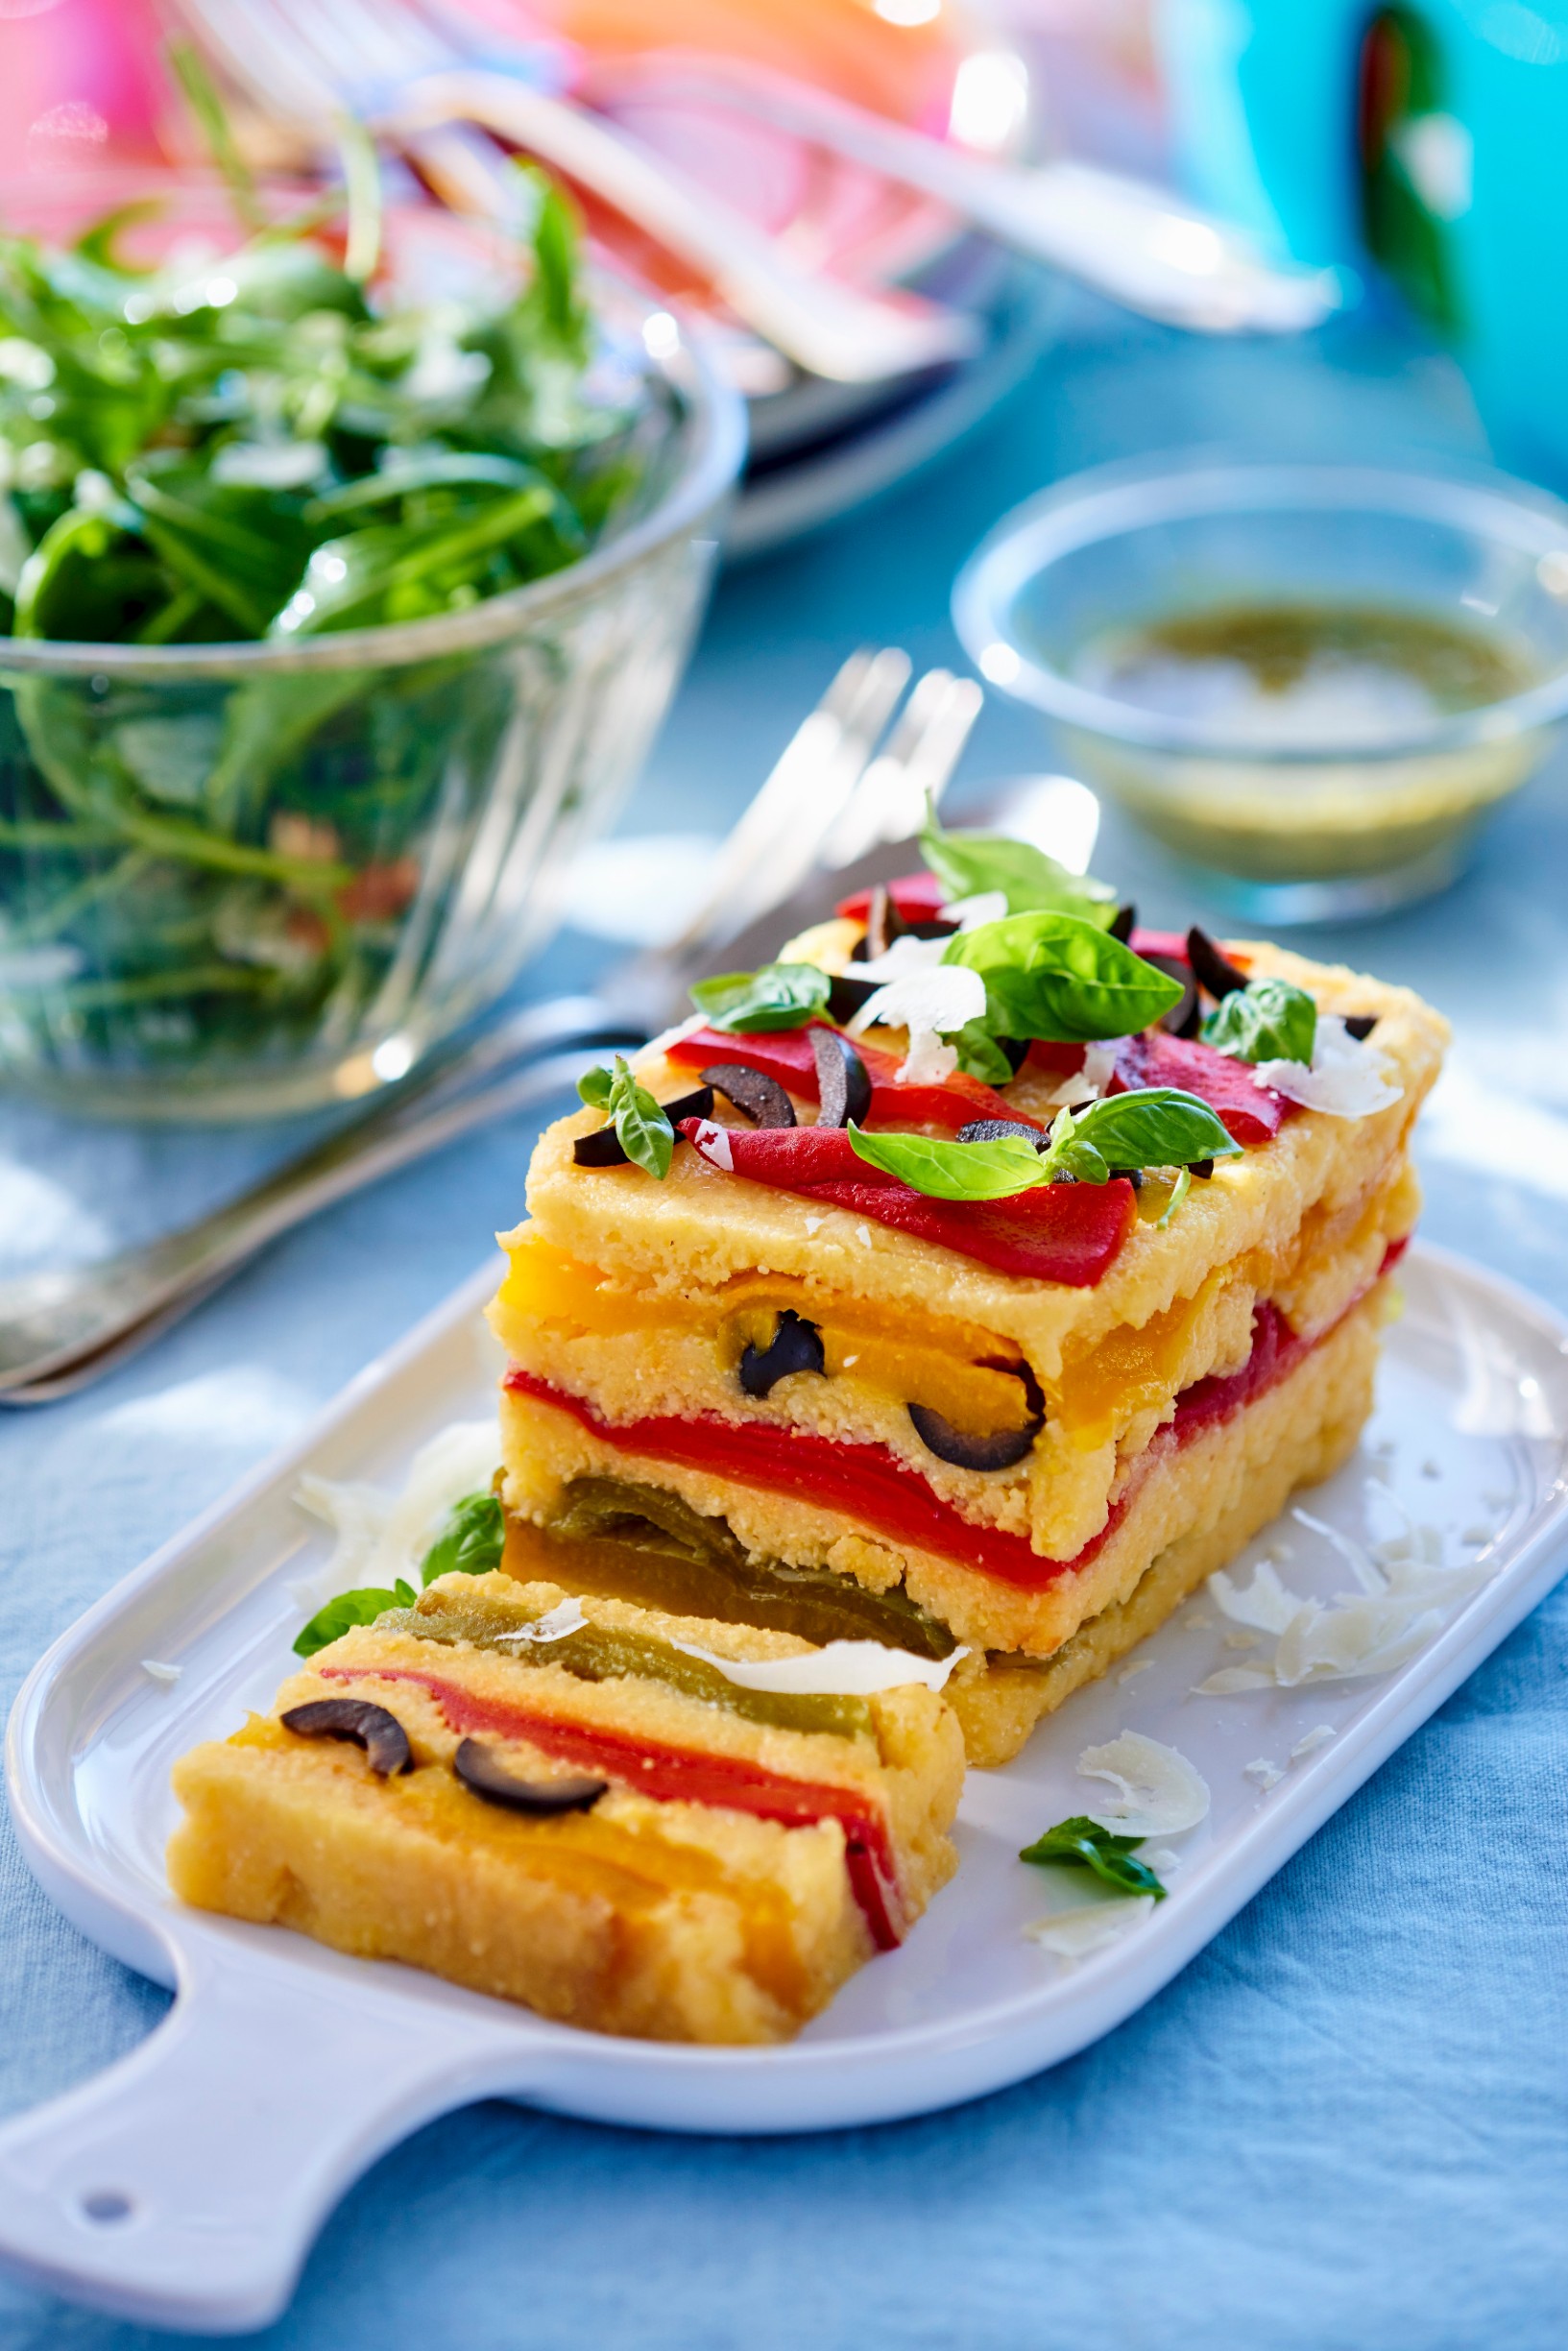 StockFood_12336366_HiRes_Polenta_terrine_with_red_pepper_and_olives